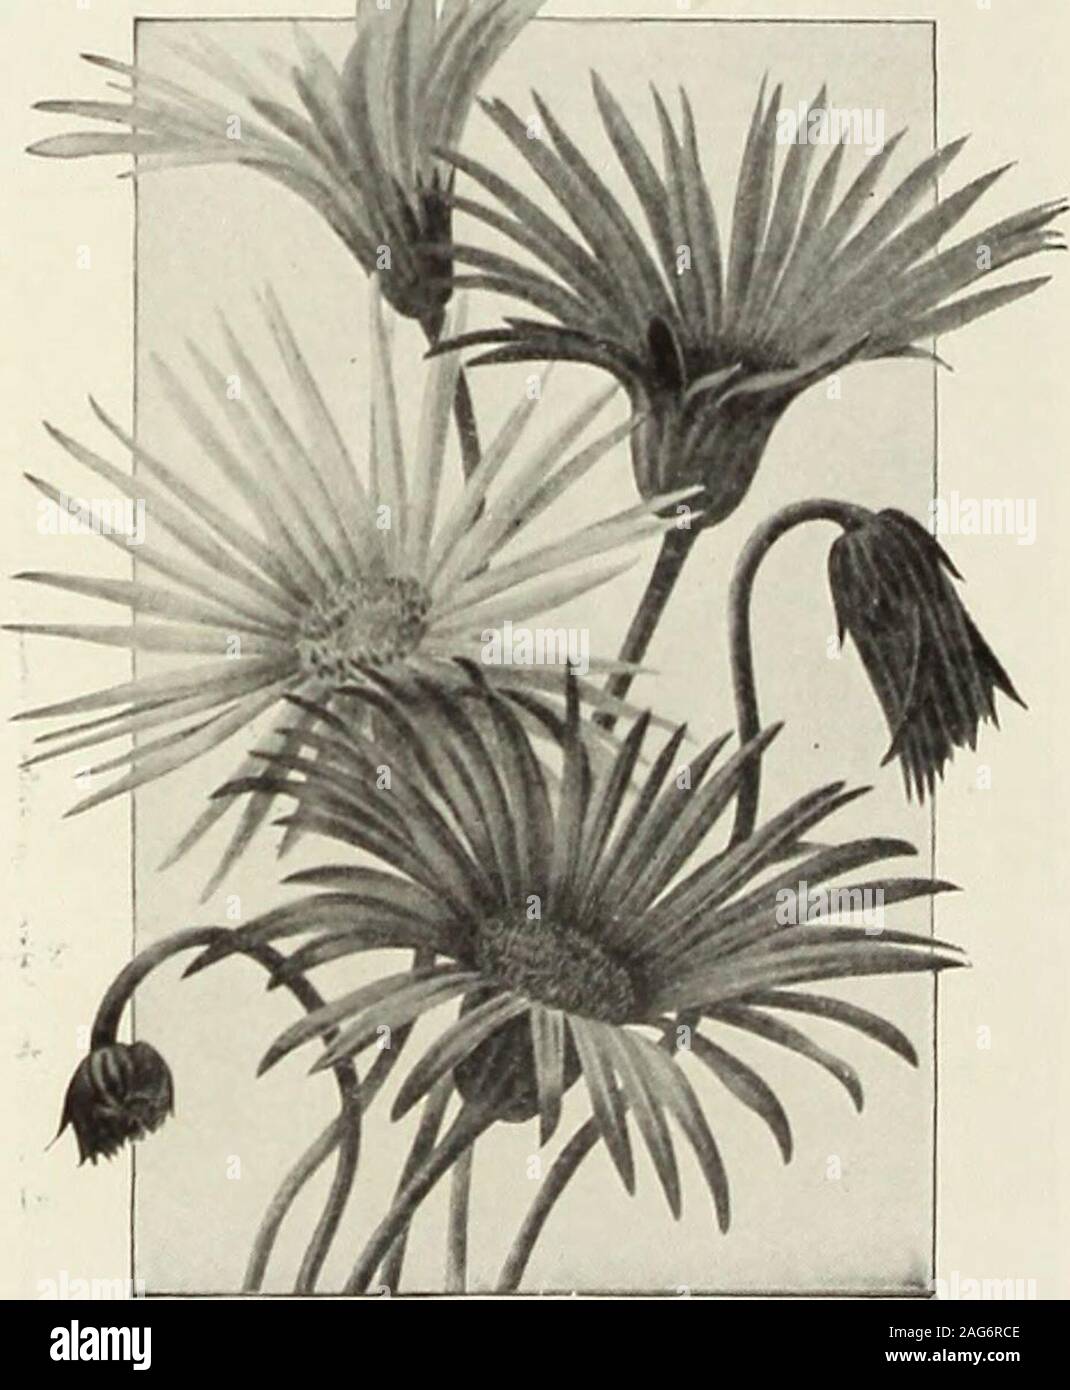 . Rawson's garden manual / W.W. Rawson & Co.. larkspur-like foliage;toward June of its second year it commencesto throw up a strong shoot from the center,which, about August, attains a height of 3 feet.Pkt. 25 cts. 3962 GYPSOPHILA ELEGANS, SNOWDRIFT. (.nual.) . most beautiful iiovclly, l)eiiit; dis-tinct from the regular by its enormous flowers,of a glistening pure white, and its habit offlowering twice in one season. I-feight 15 inches.Pkt. 15 cts. 3965 GYPSOPHILA ELEGANS, CARMINEA. .? new color, l)rij;lit i arniiiu- : i.i|uisite forbouiiuels. .nual. 1  &gt; iiu lus high. Ikt. i ts.4468 LA Stock Photo